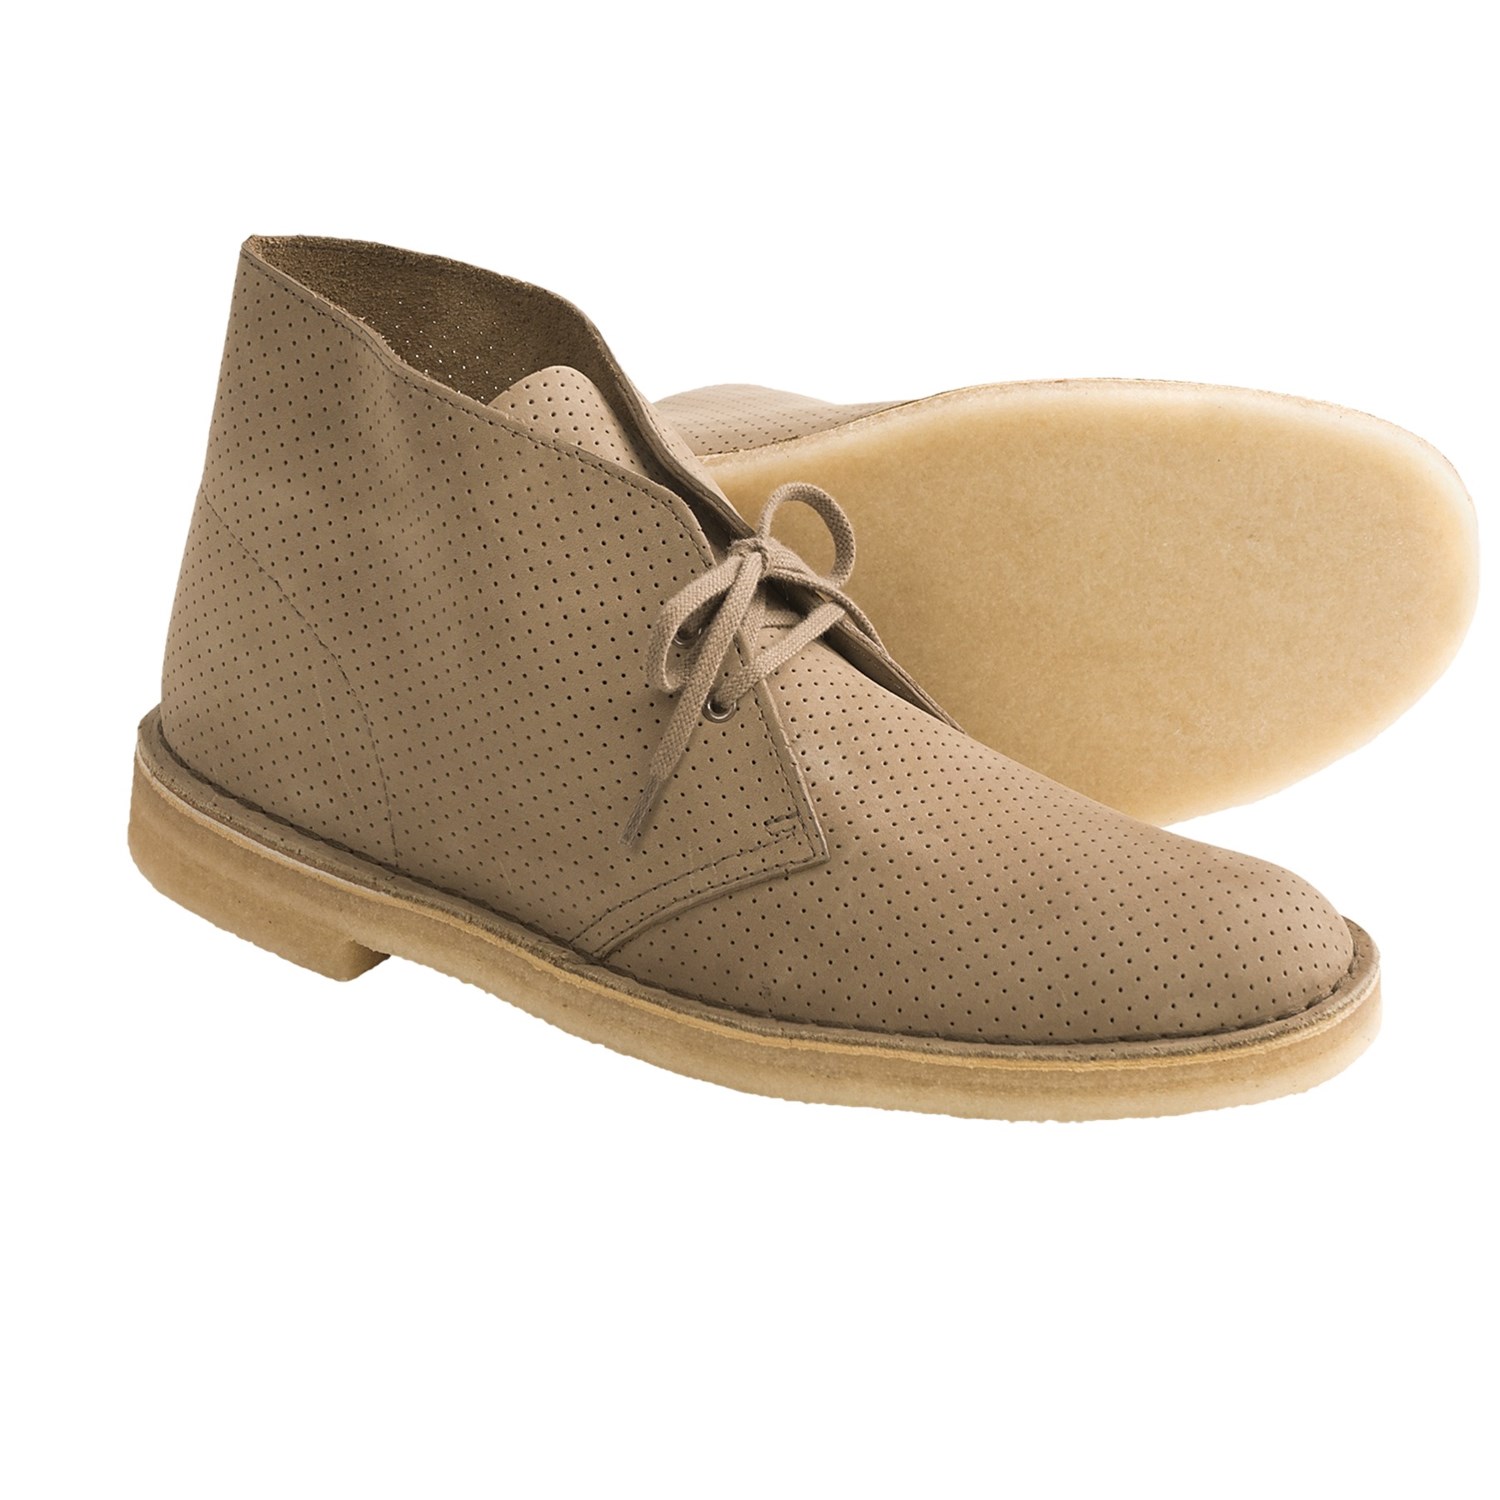 Clarks Desert Boots - Suede (For Men) - Save 40%